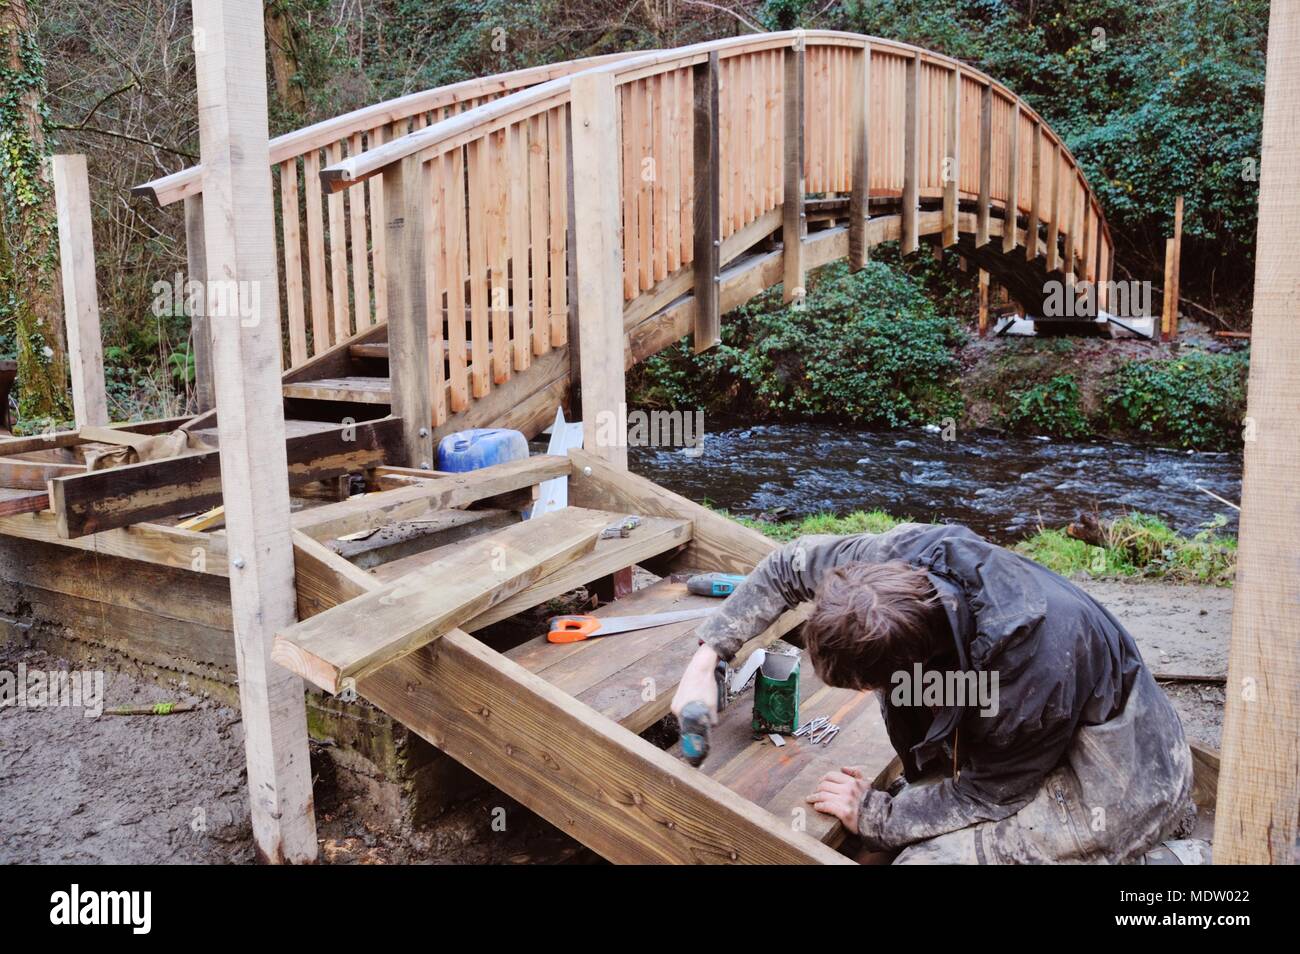 27 in a series of 32, building a timber footbridge, construction of access steps. Stock Photo